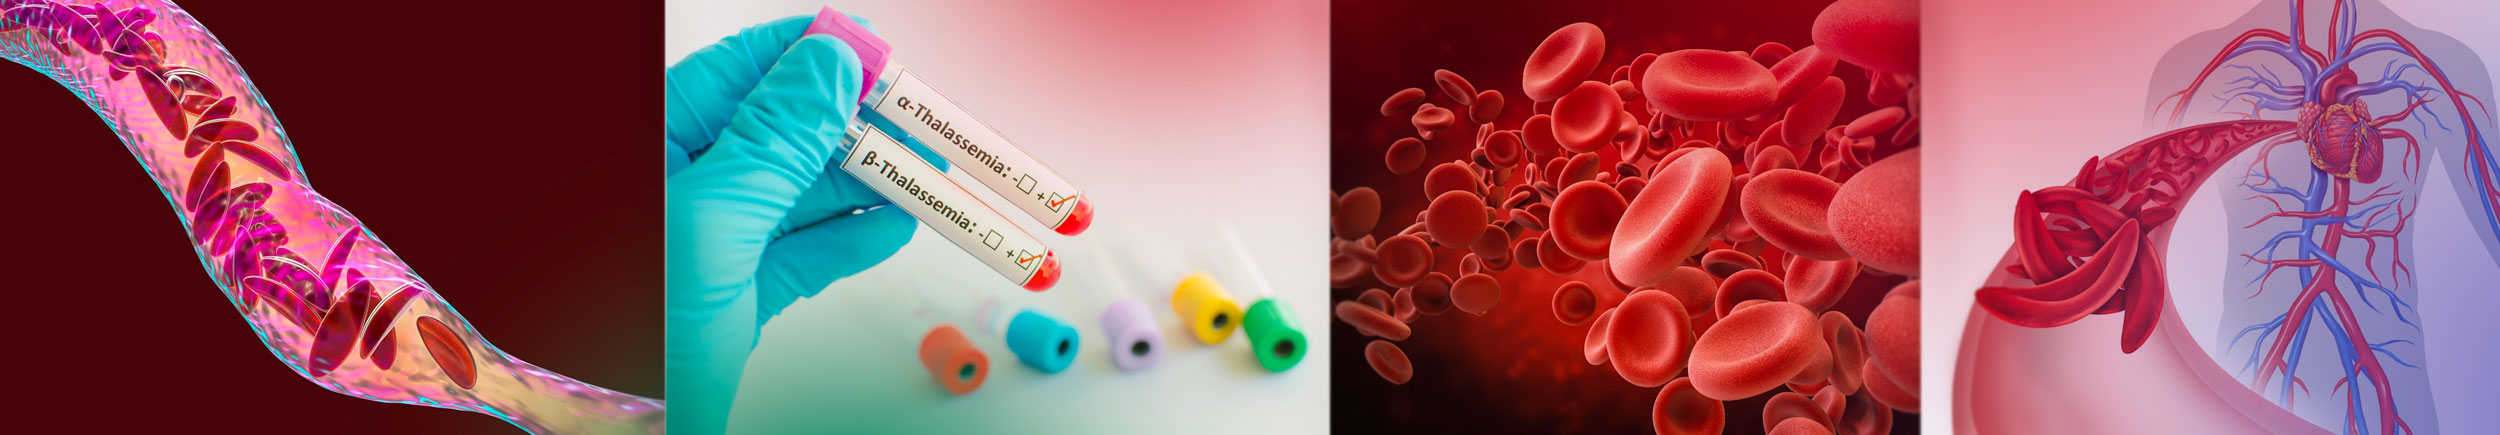 rendered images of blood disorders